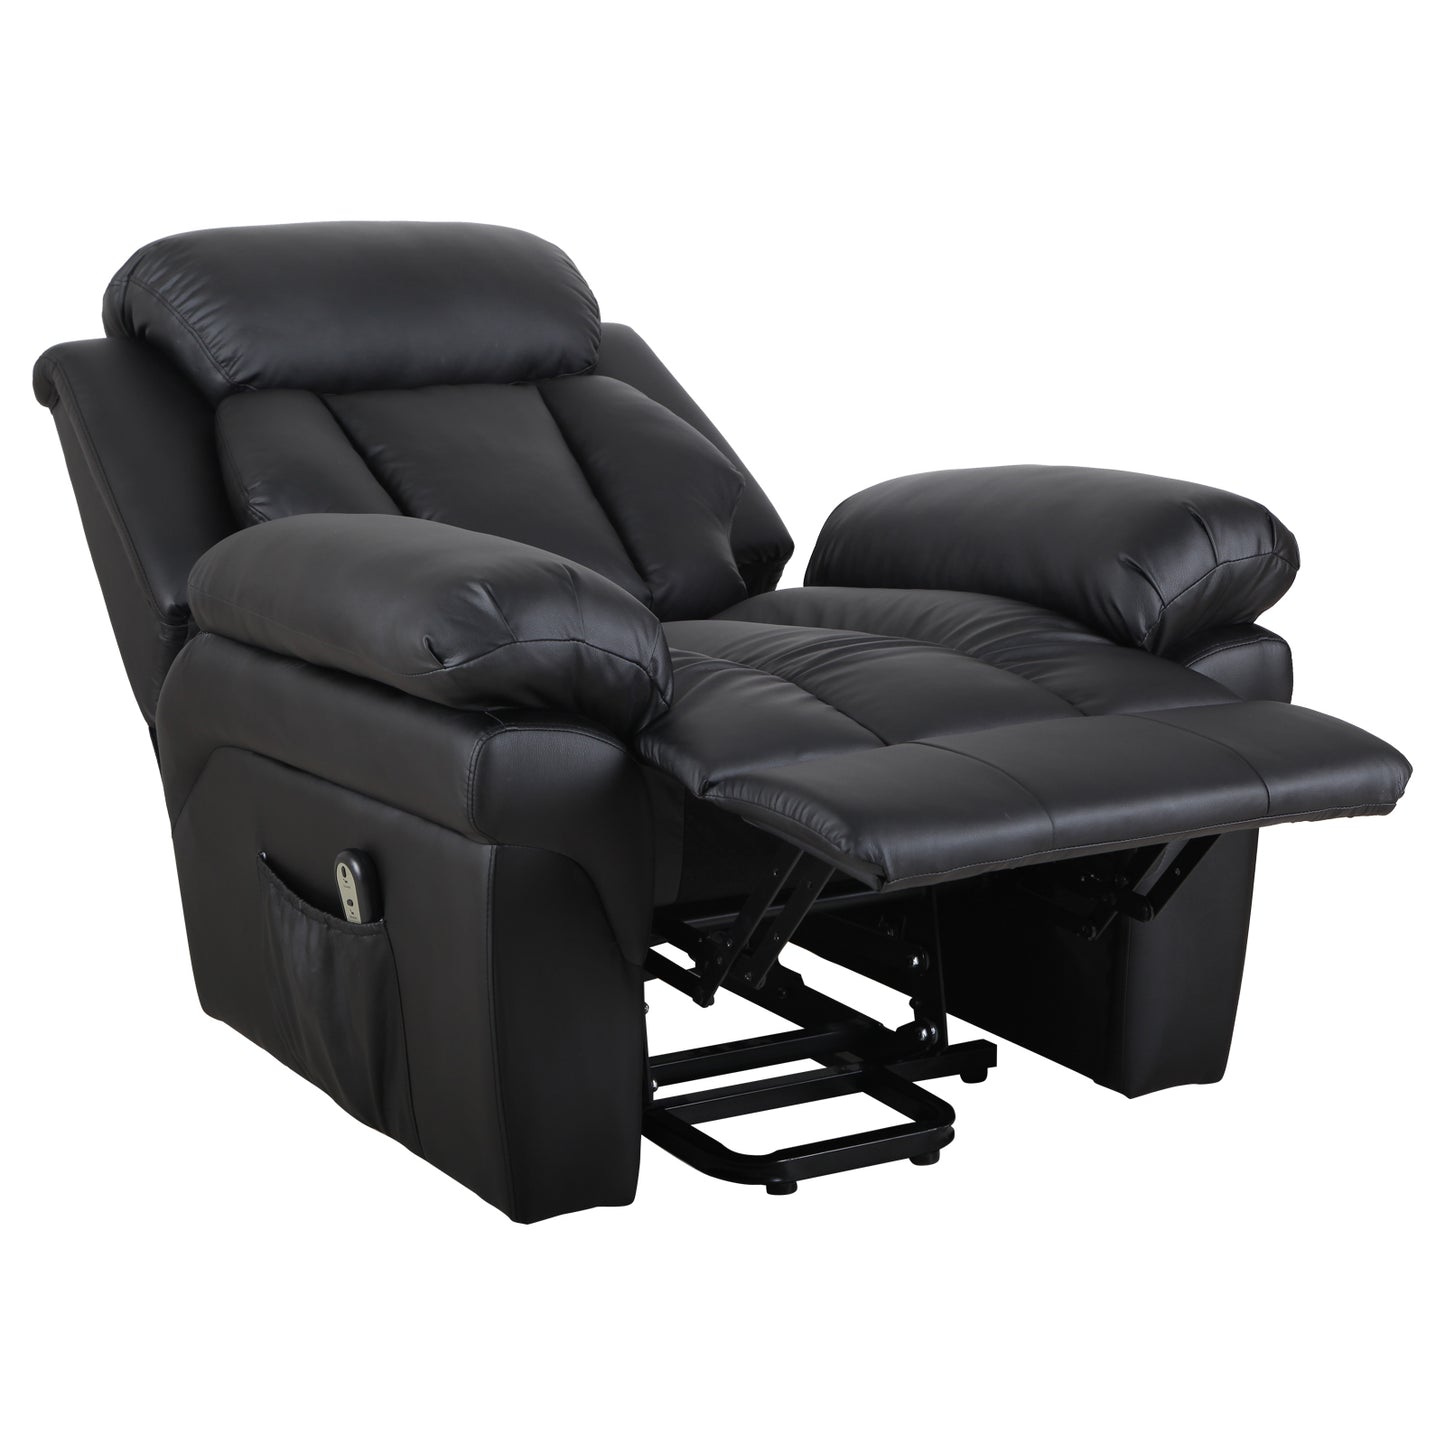 HOMCOM Lift Armchair Electric Power Stand Assist Recliner Chair w/Padding PU Leather Black